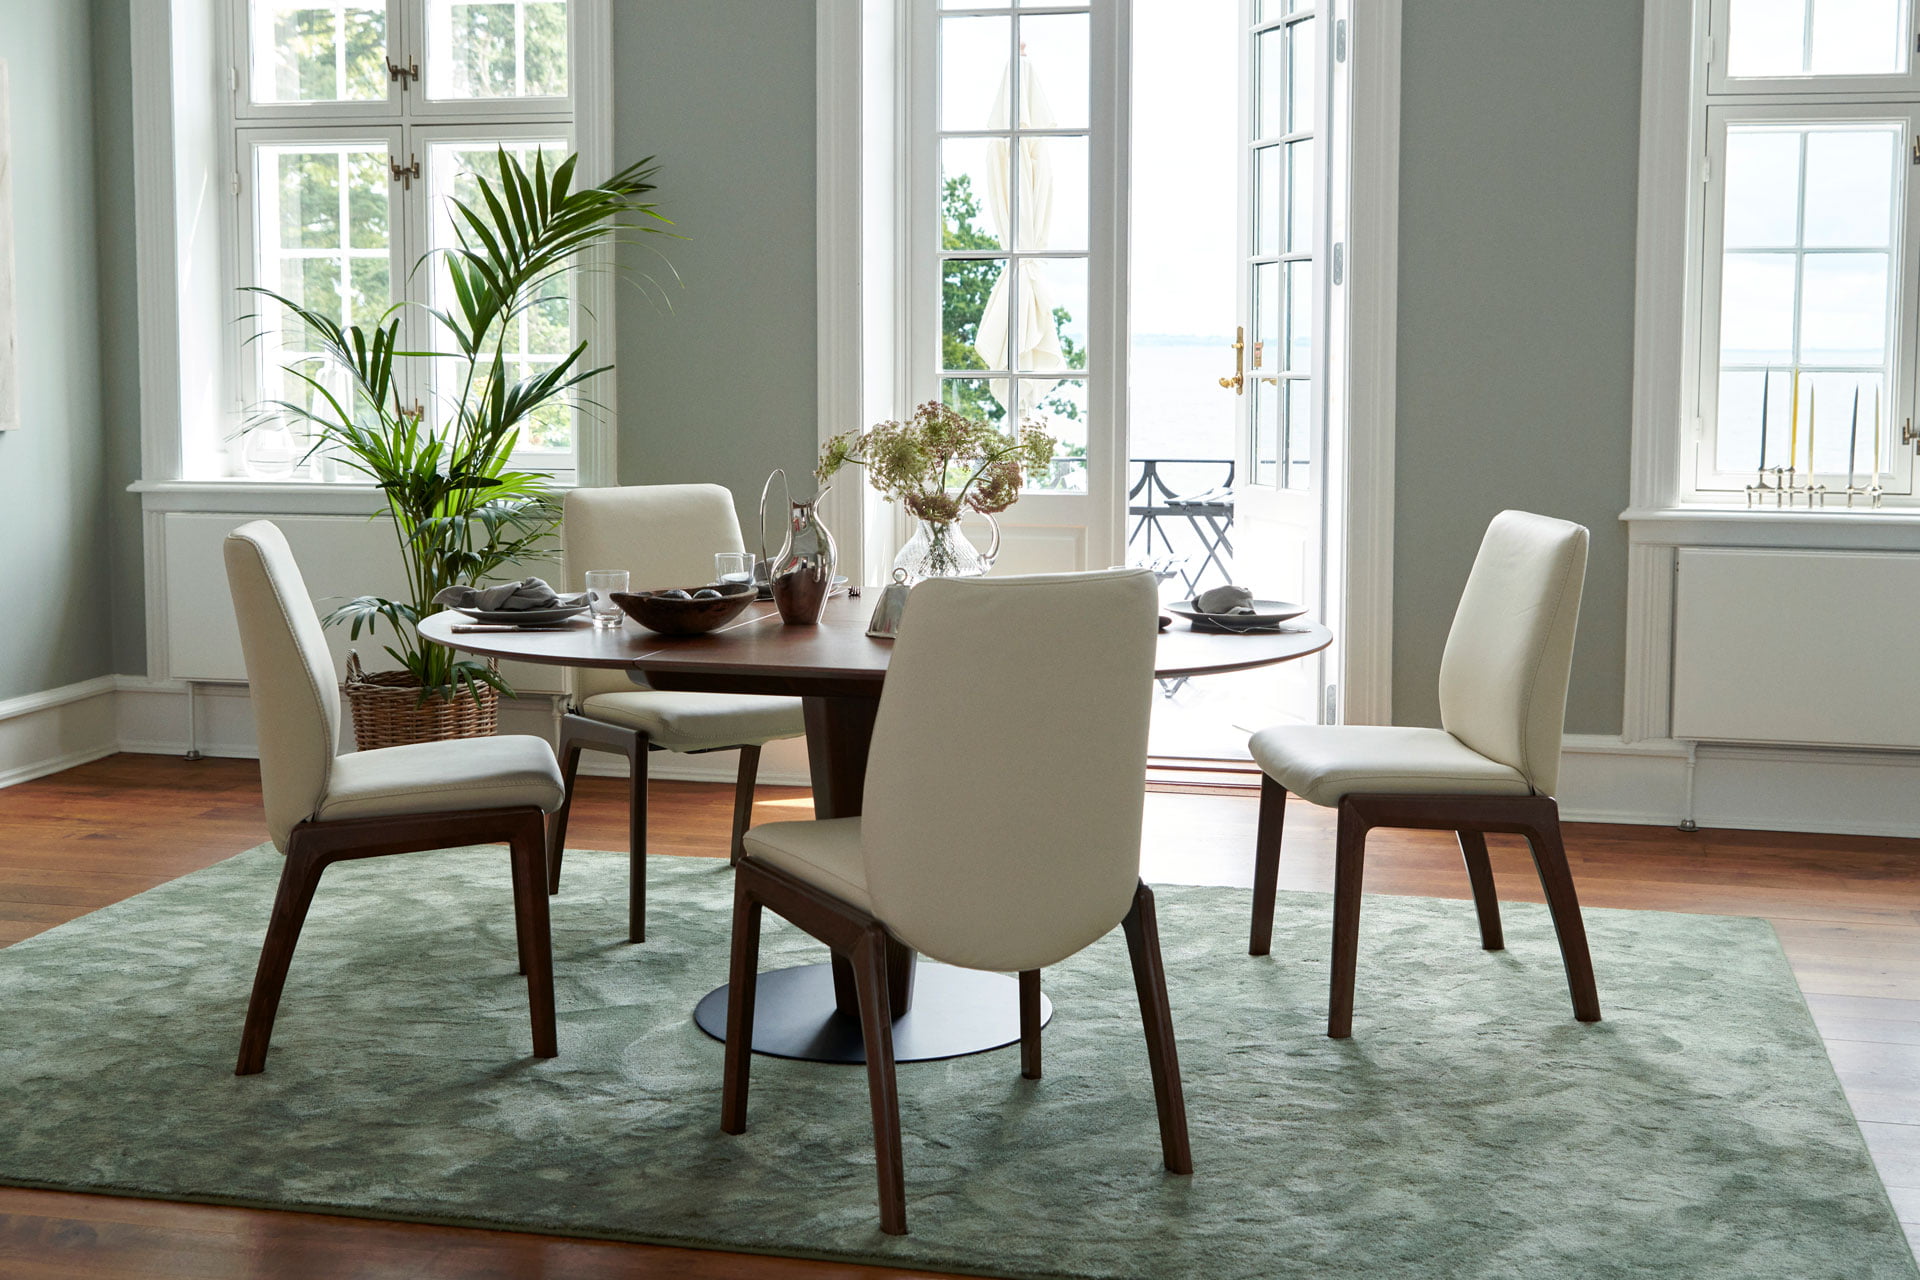 Stressless Laurel dining chairs and Bordeaux table